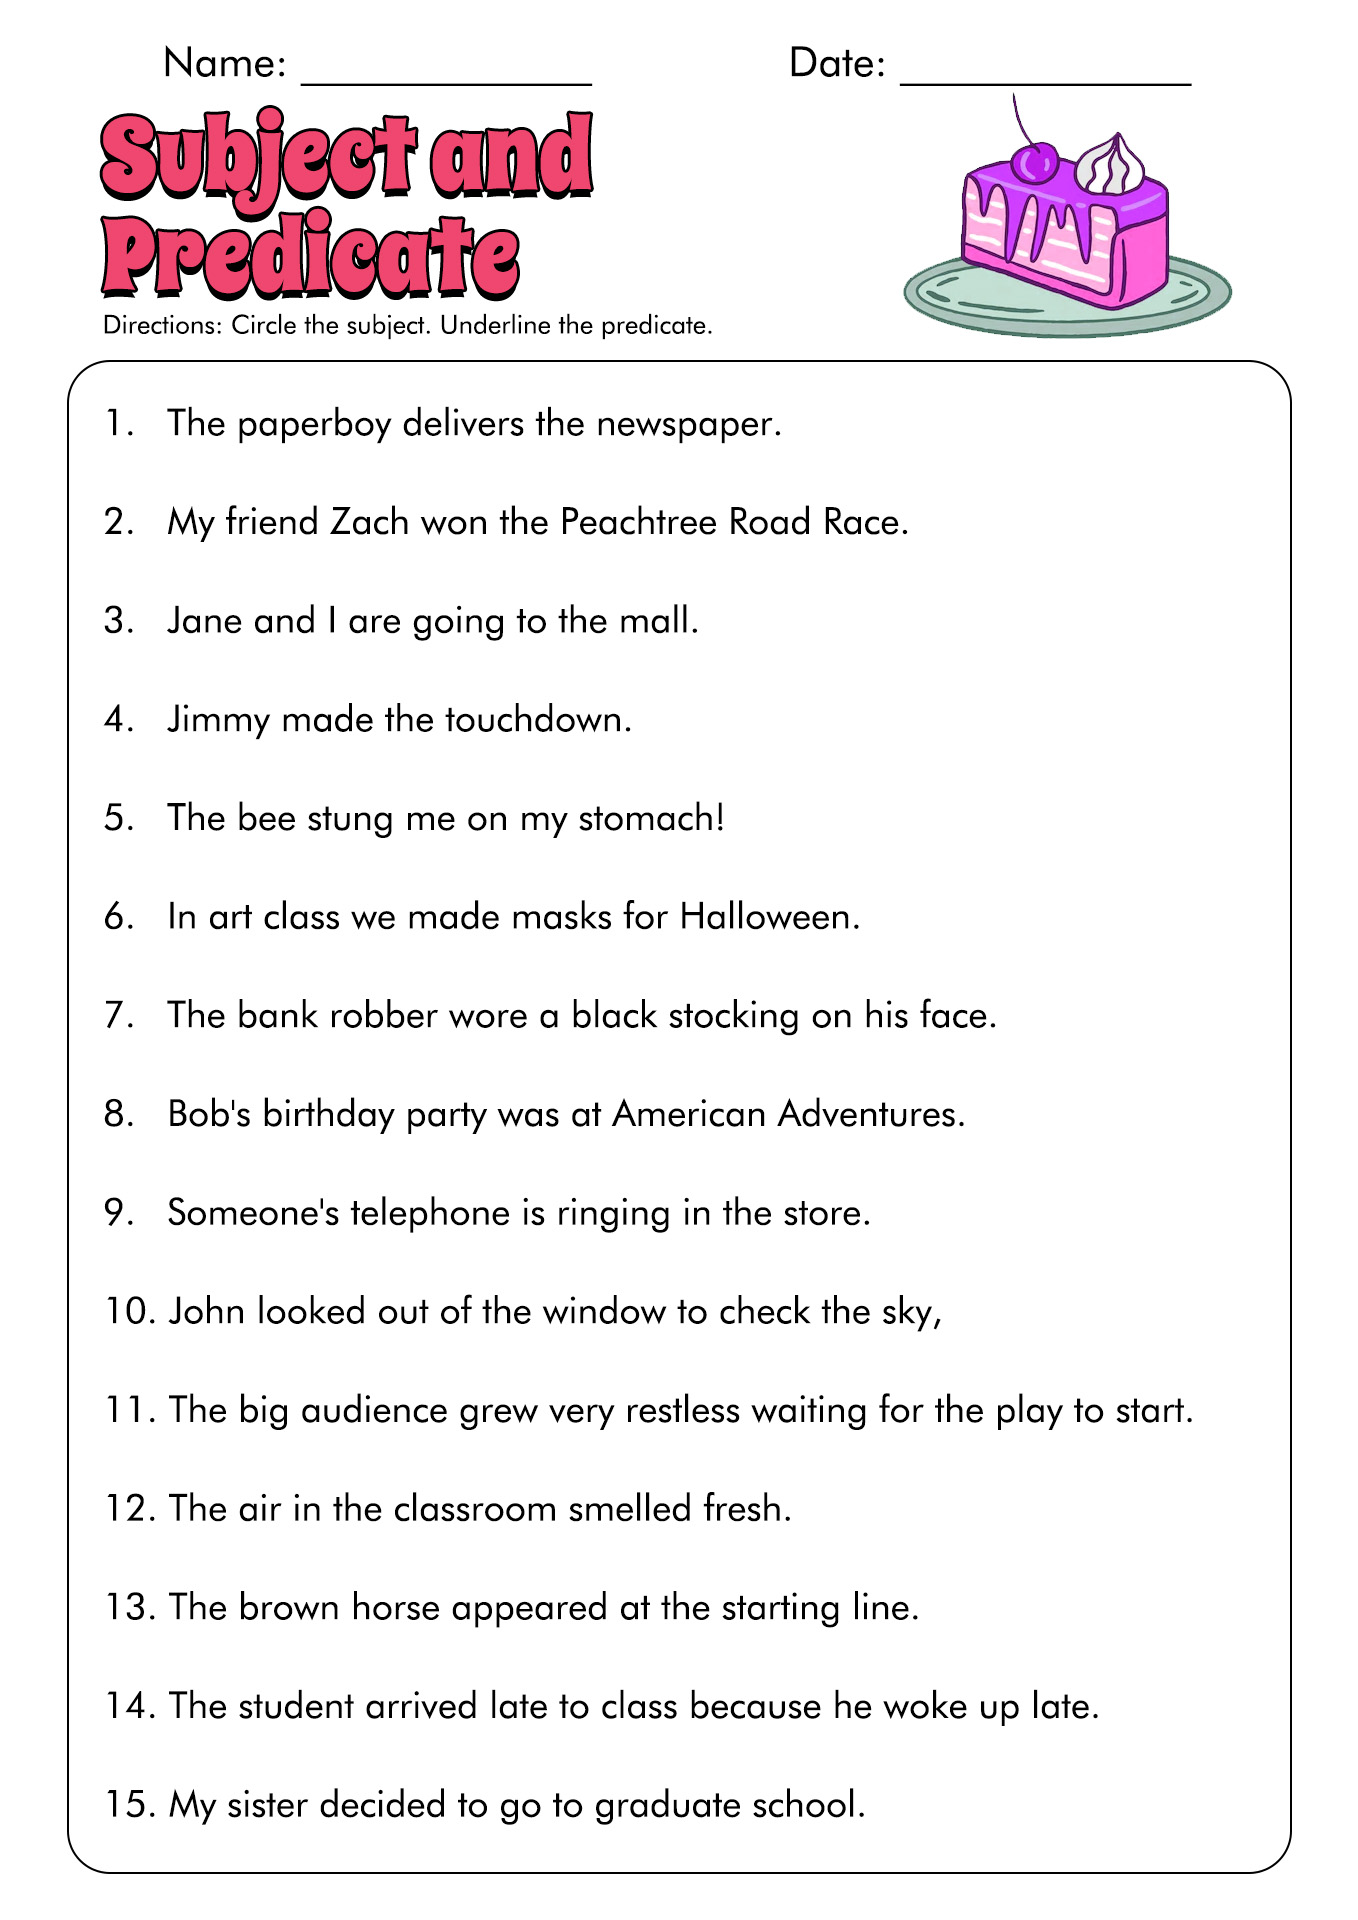 Complete Subject and Predicate Worksheets Image